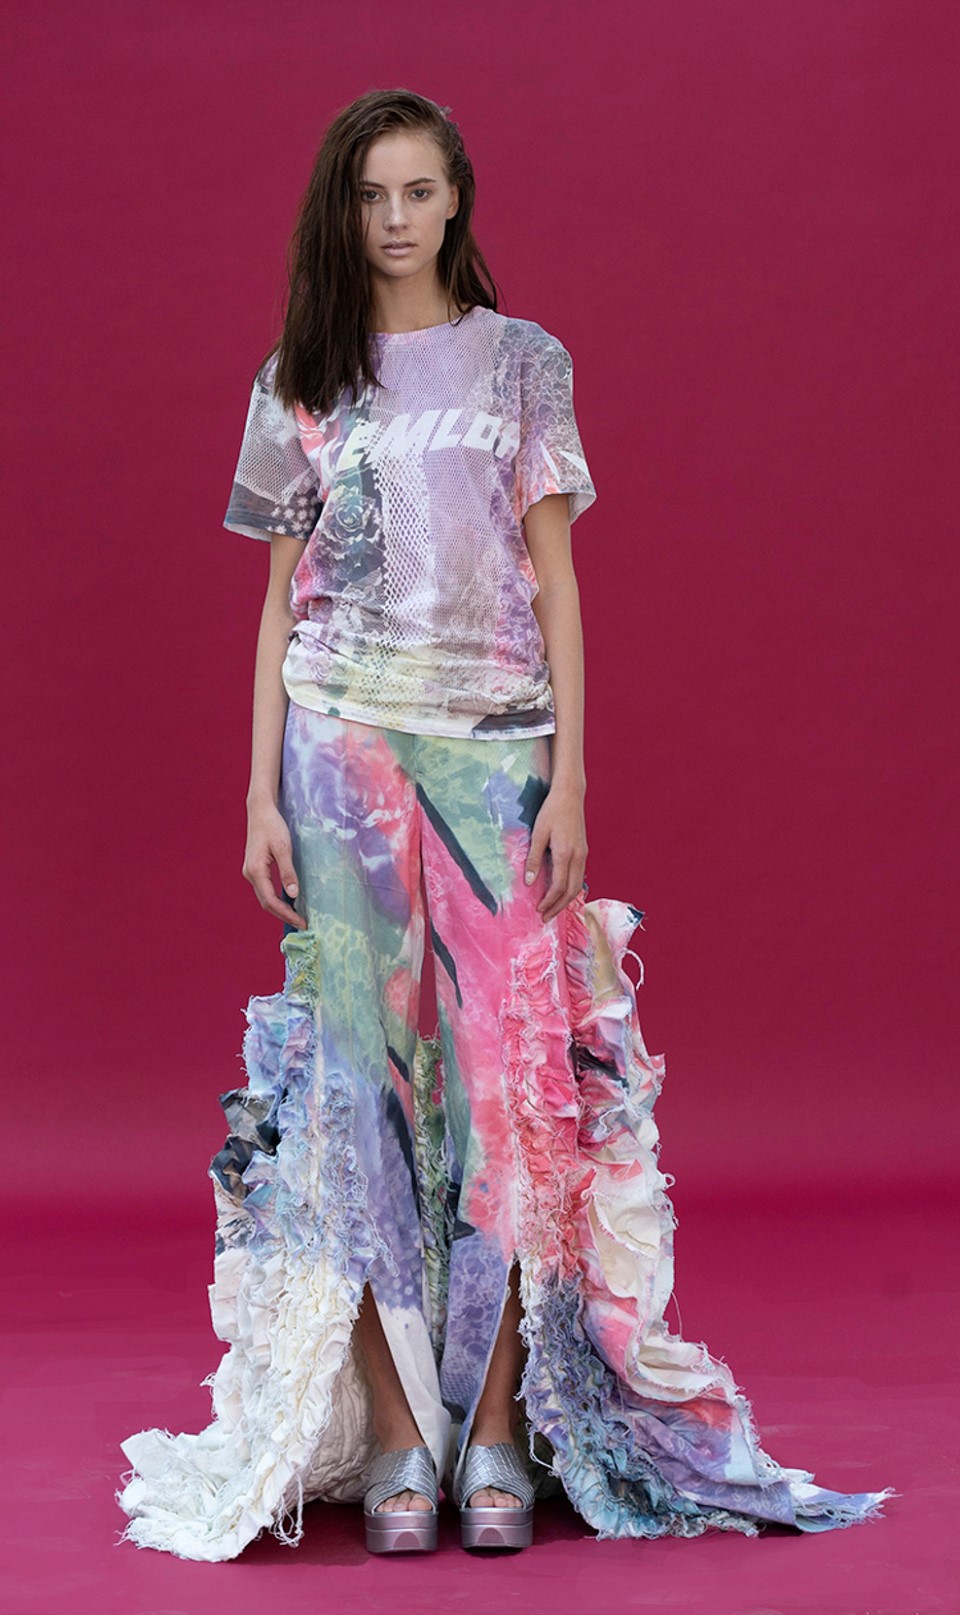 Image of collection Printograms – Prints Developed Directly onto Garments by Elin Holm 